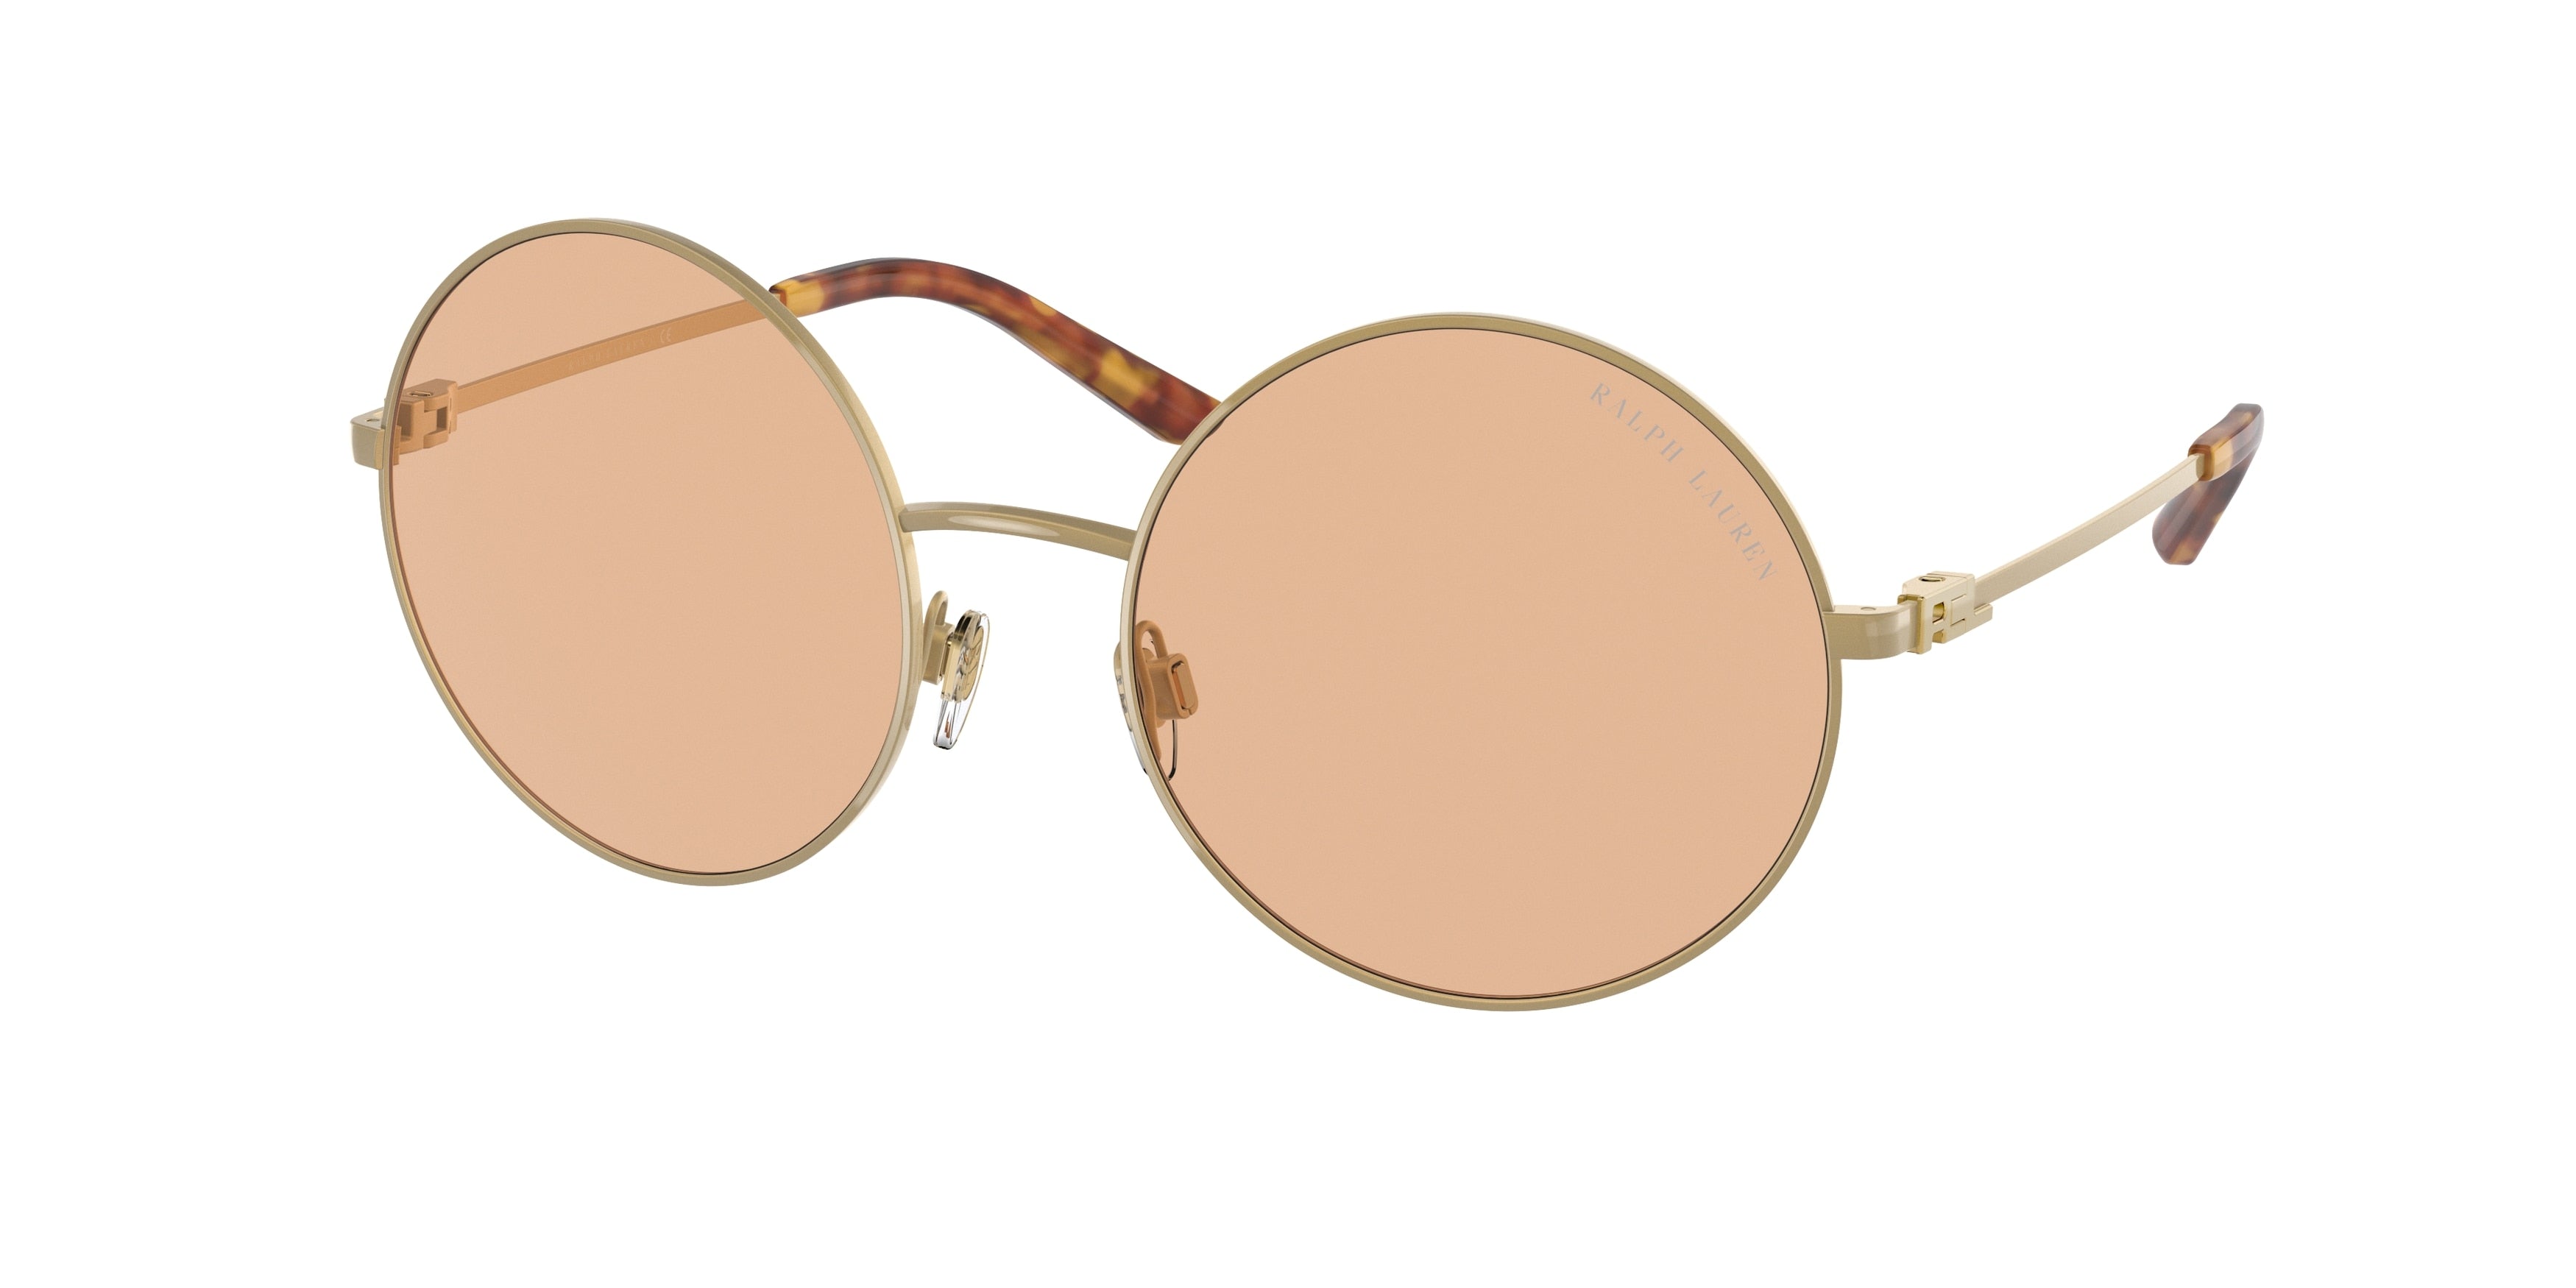 Ralph Lauren RL7072 Round Sunglasses  931271-Shiny Sanded Gold 55-135-19 - Color Map Gold